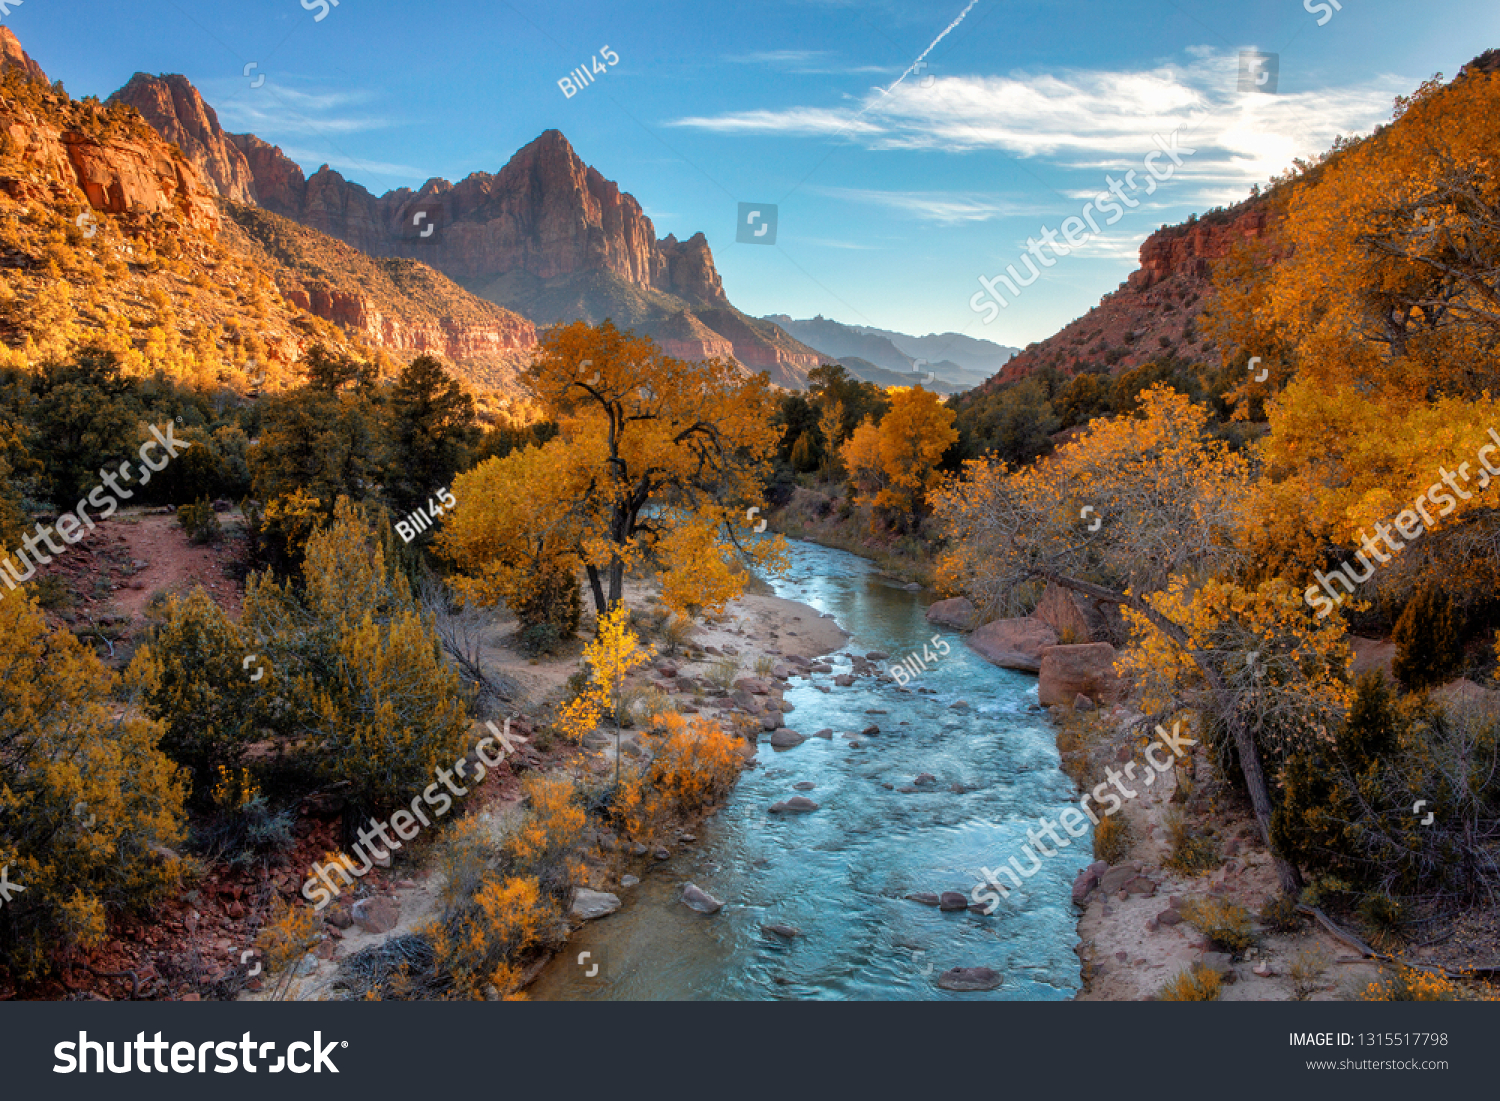 View of the Watchman mountain and the virgin river in Zion National Park located in the Southwestern United States, near Springdale, Utah, Arizona #1315517798